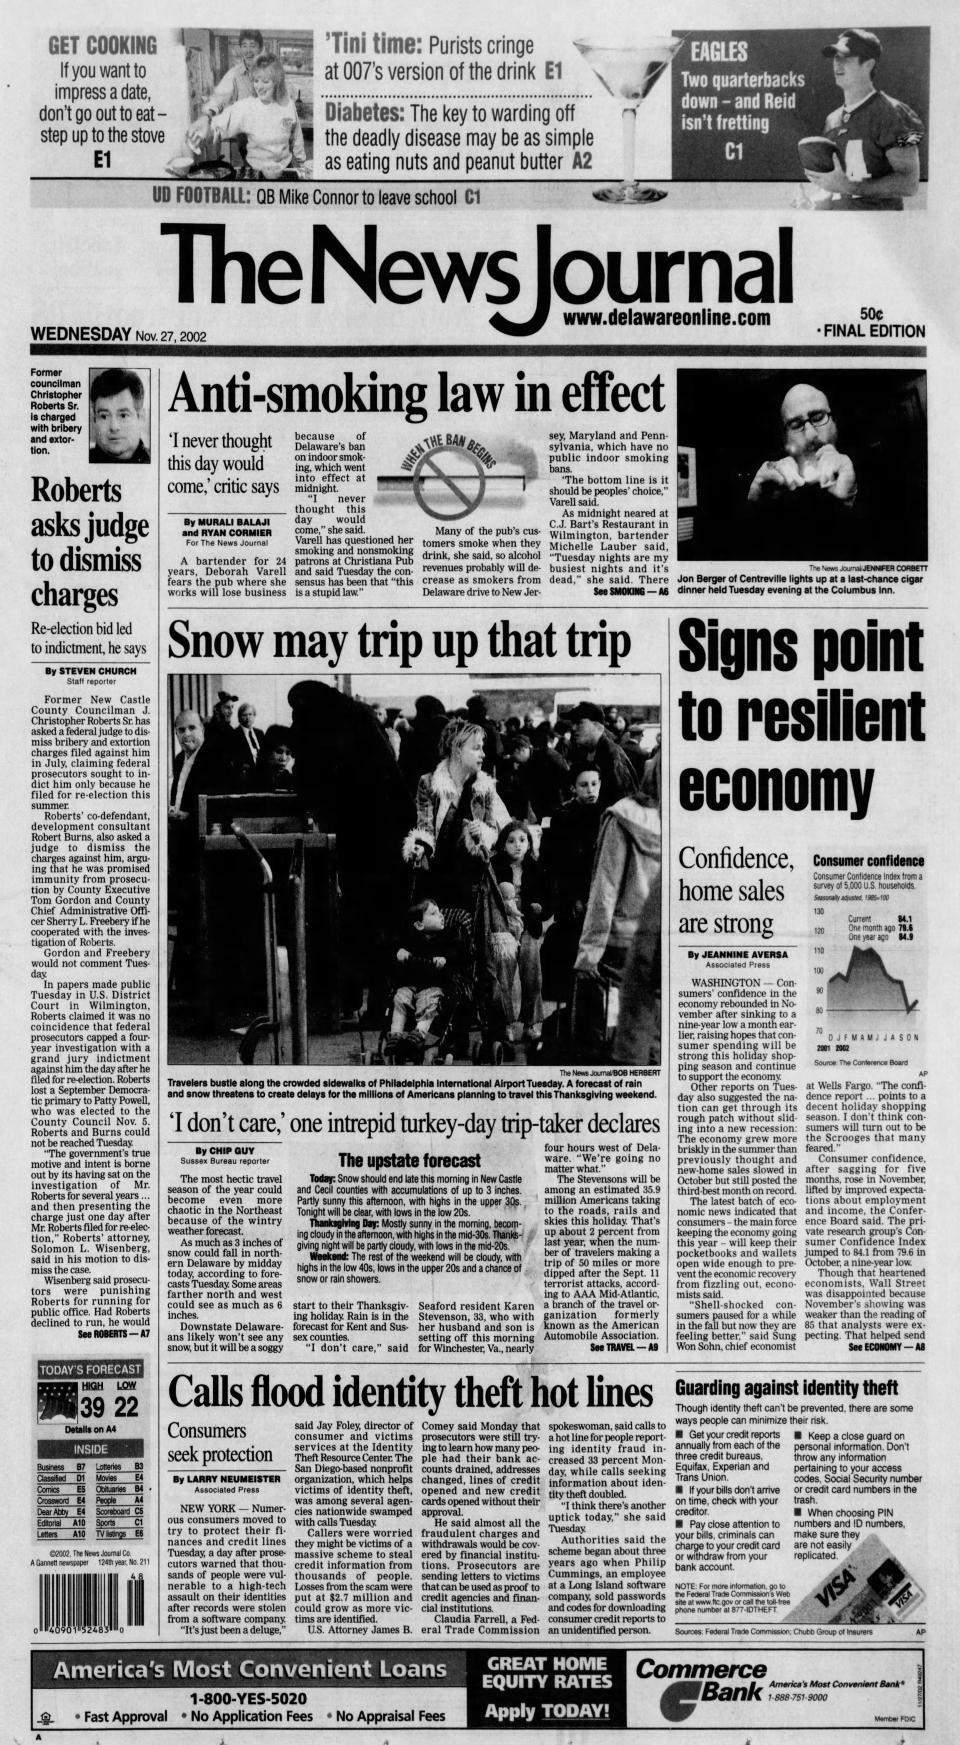 Front page of The News Journal from Nov. 27, 2002.